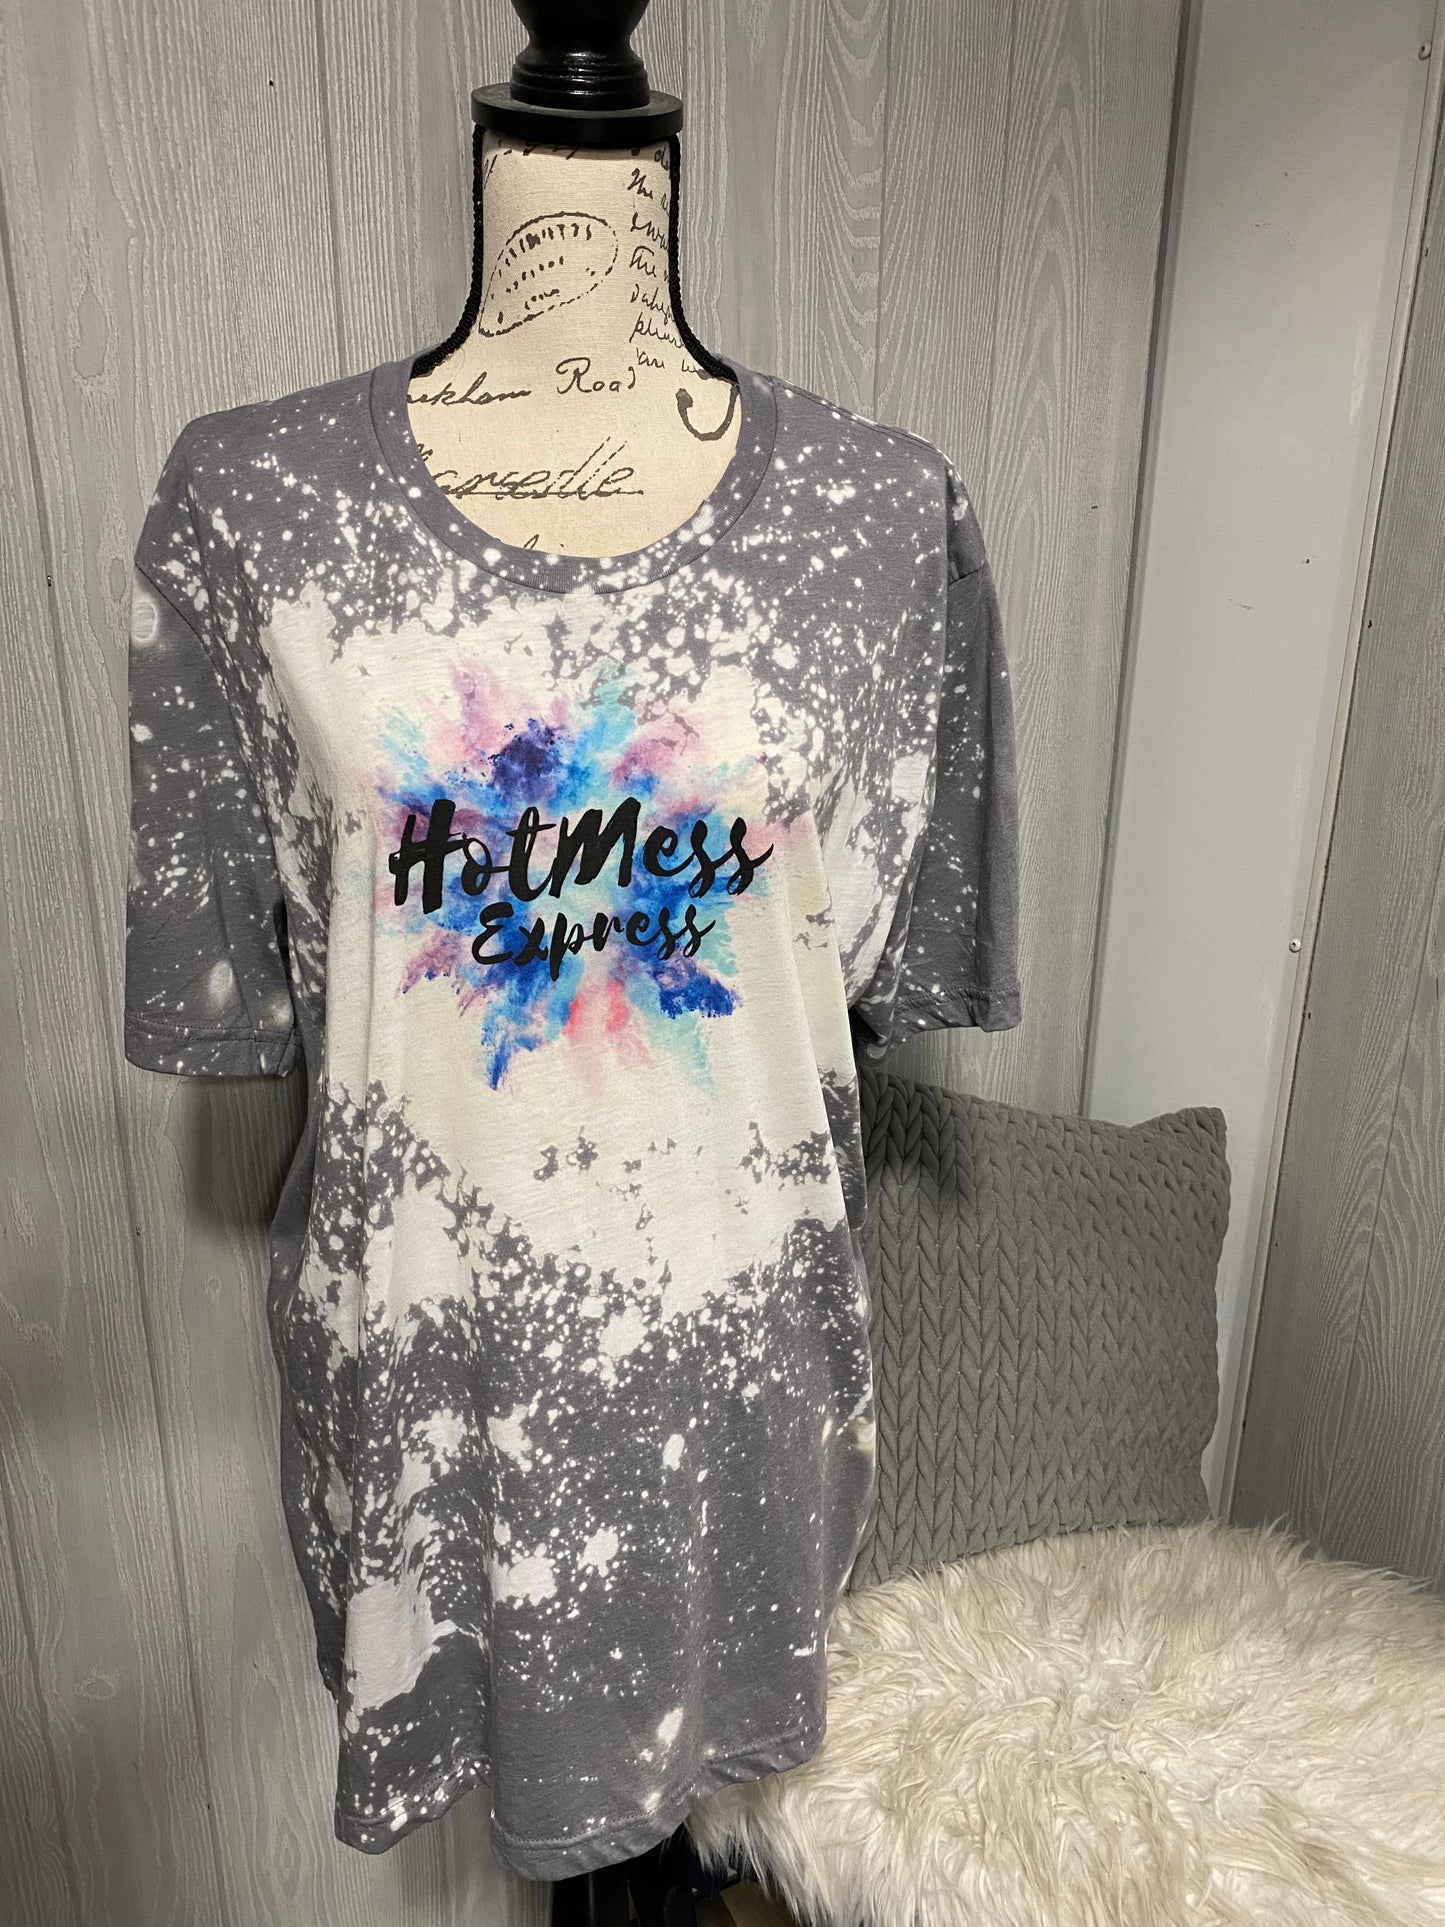 HotMess Express Graphic Tee Bleached